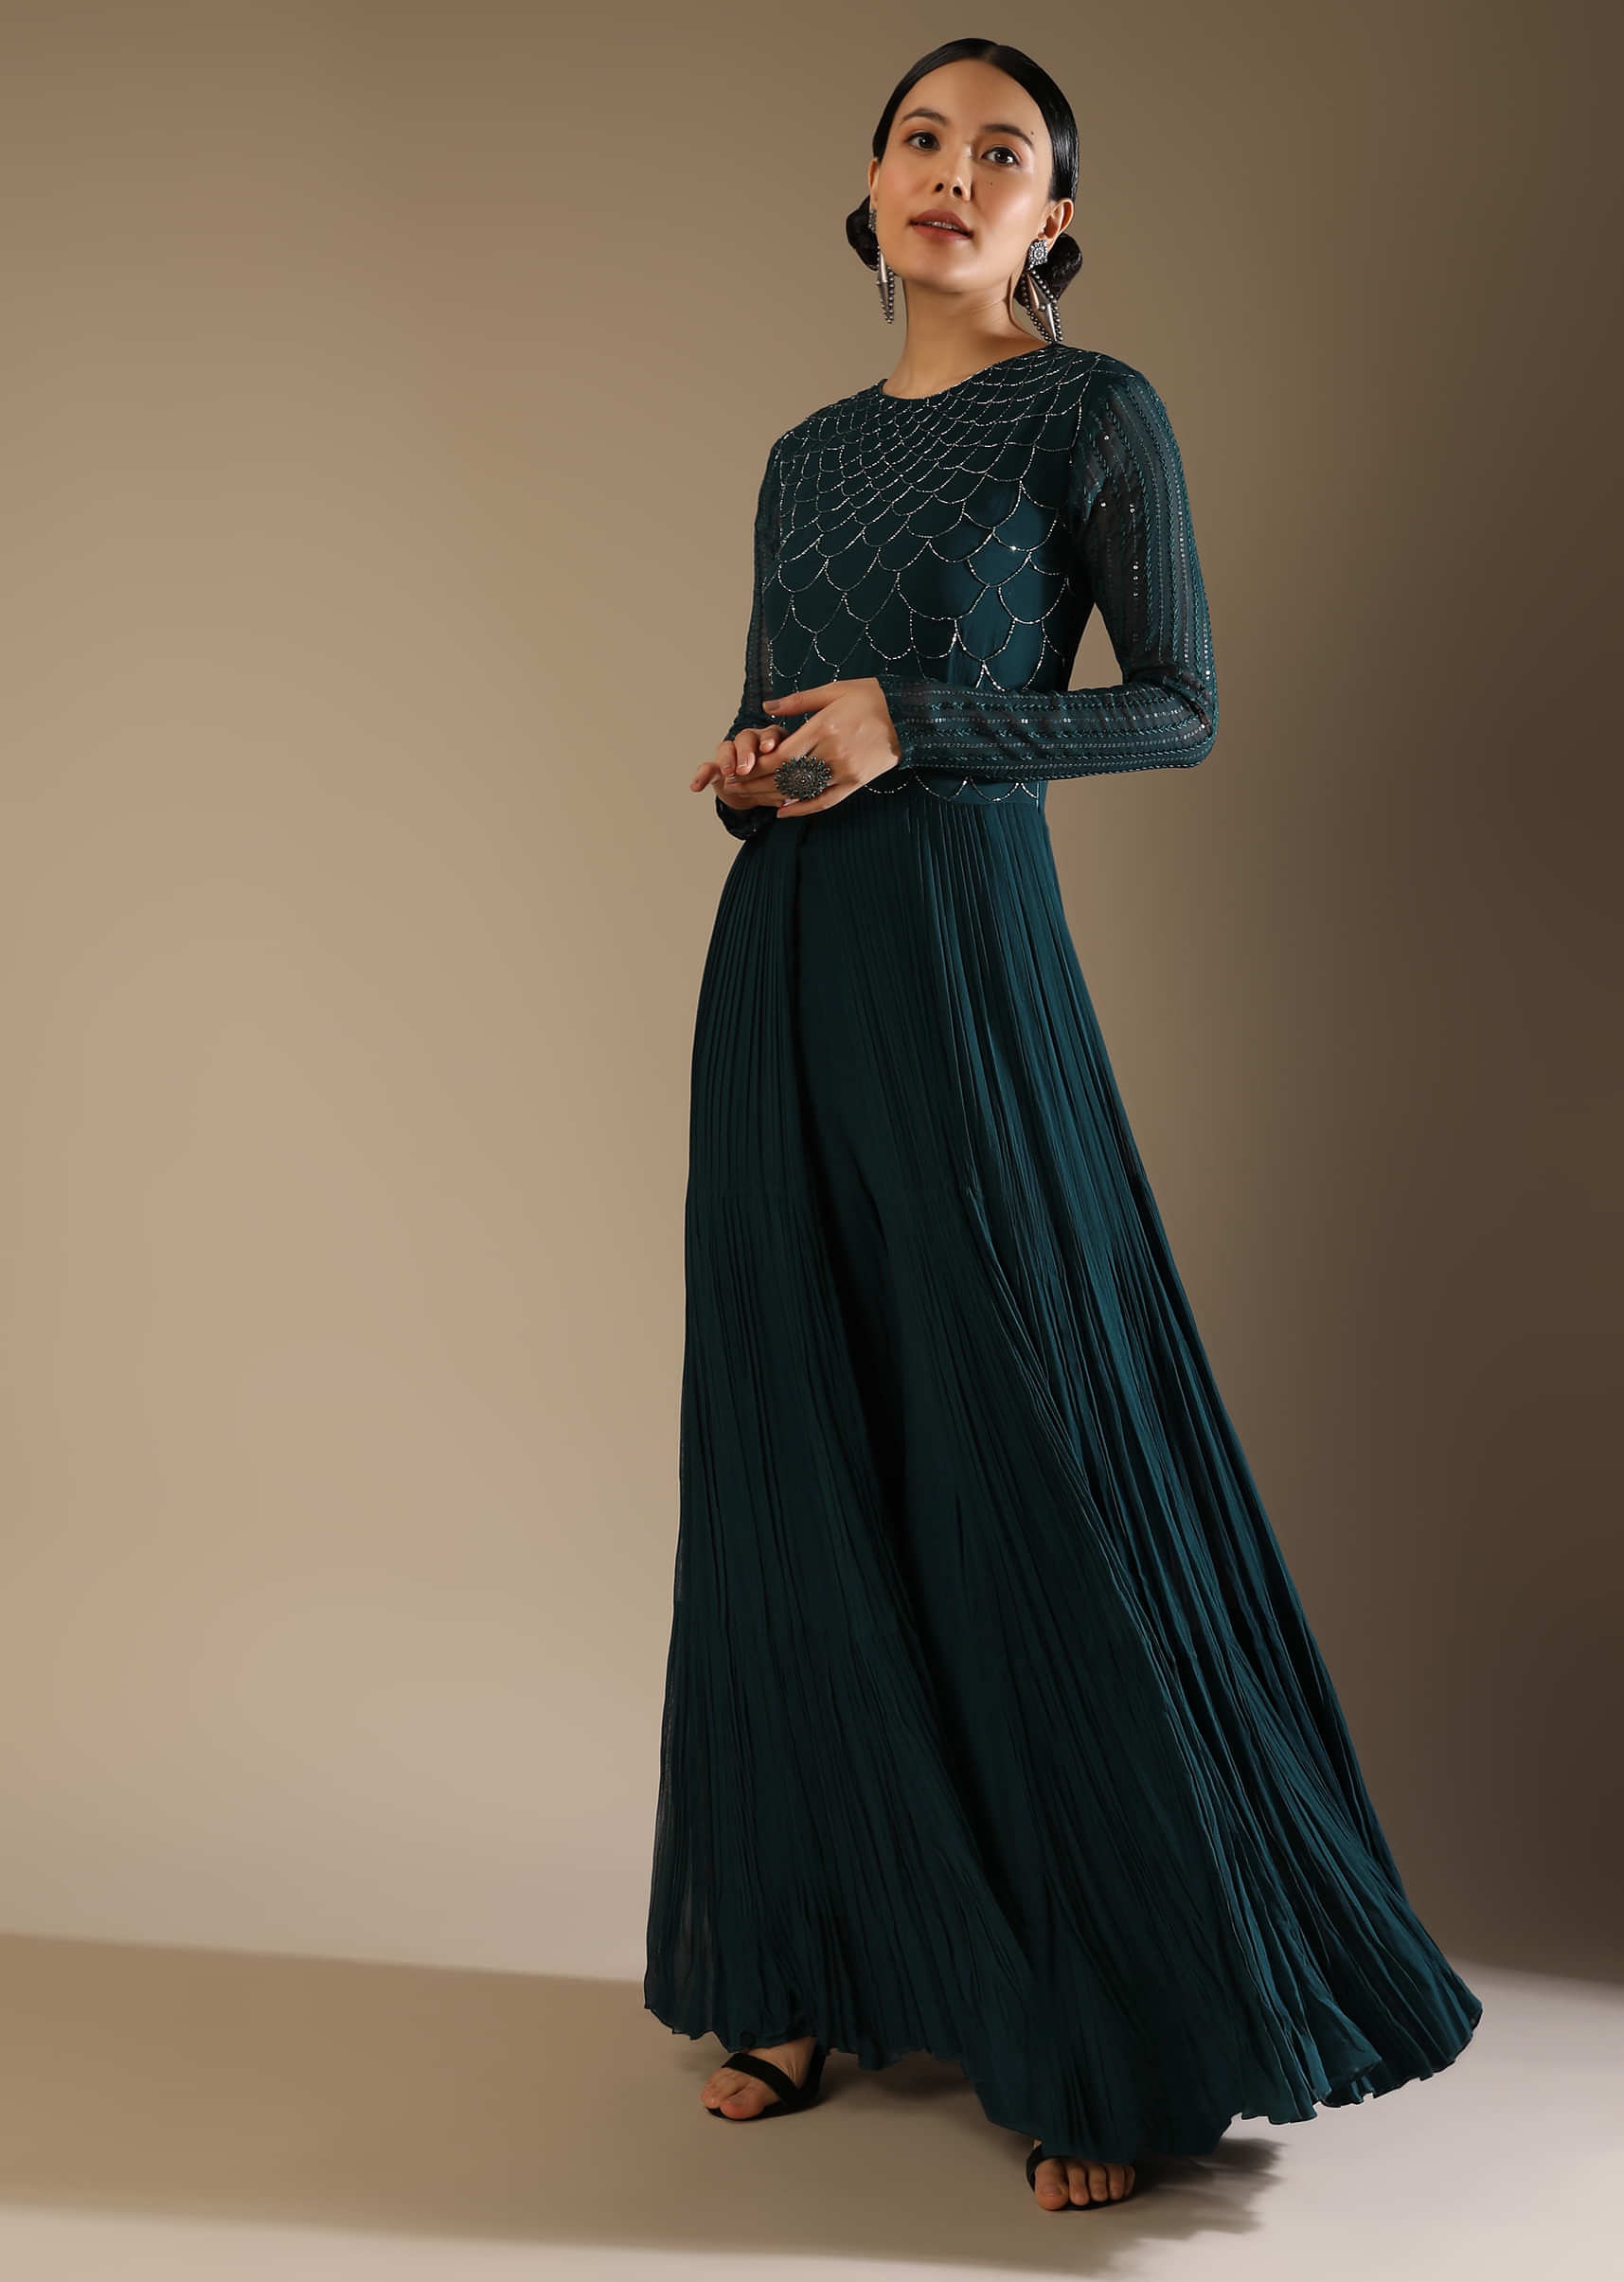 Dark Teal Palazzo Suit With A Long Slit Top Adorned In Cut Dana Work In Scallop Design  